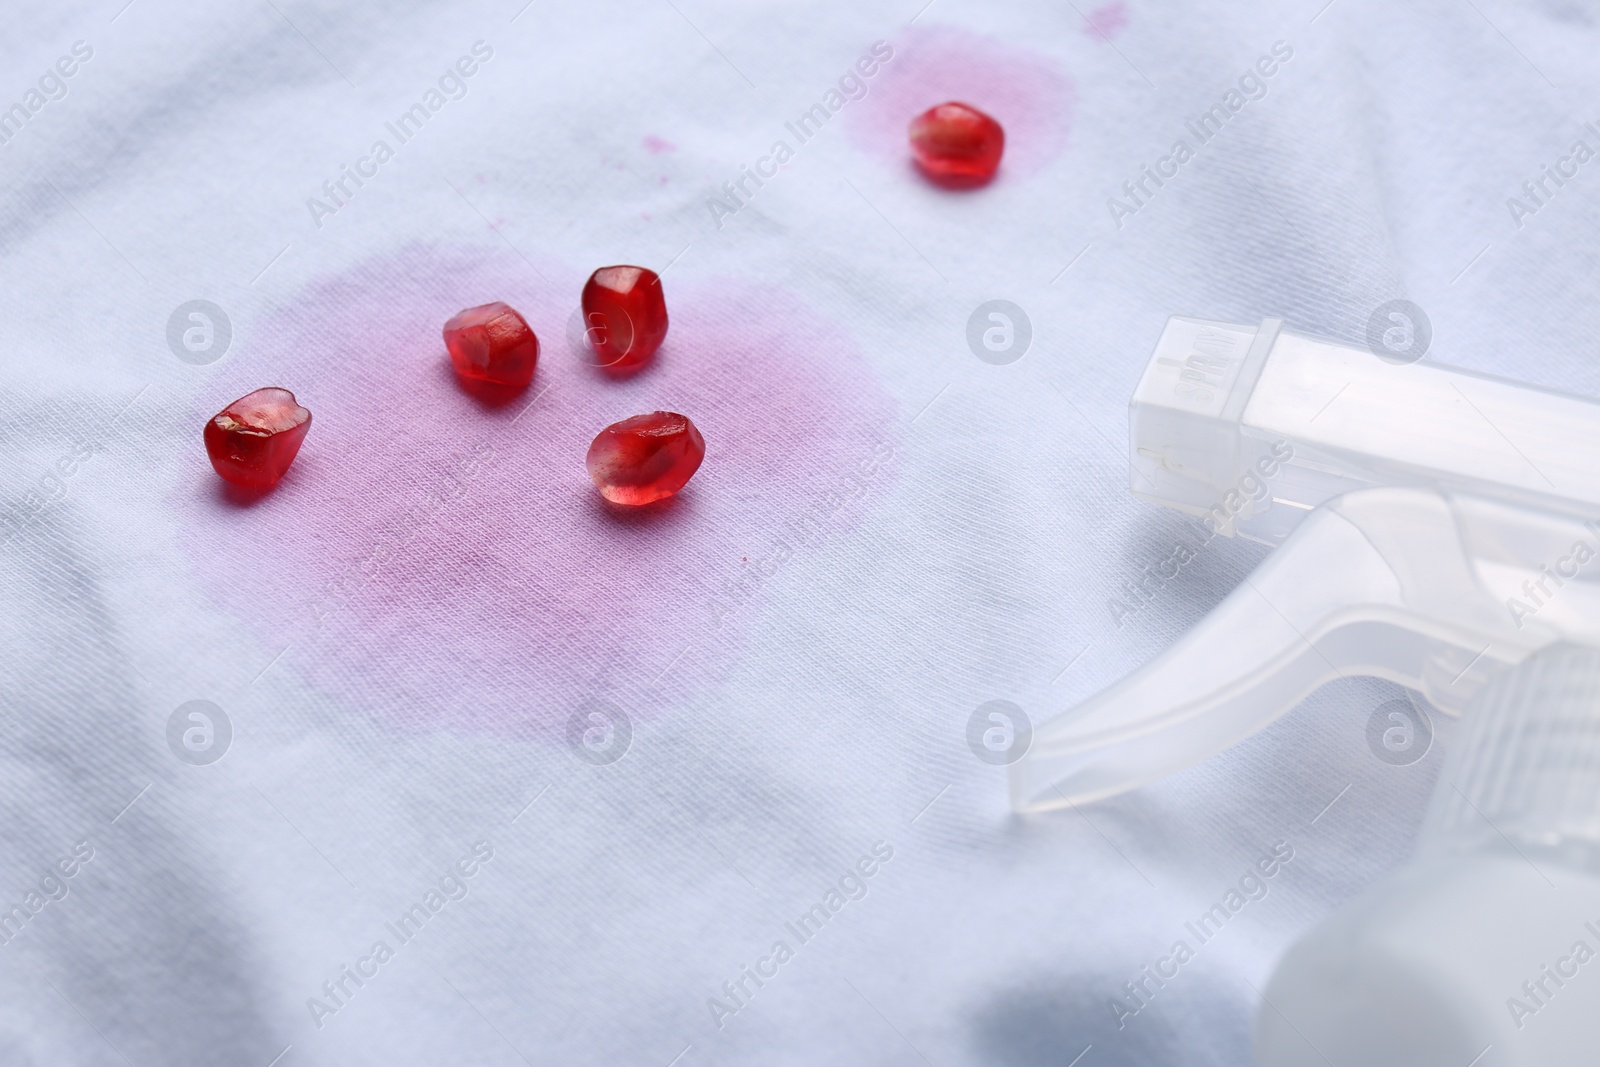 Photo of White shirt with fruit juicy stains, detergent and pomegranate seeds as background, closeup